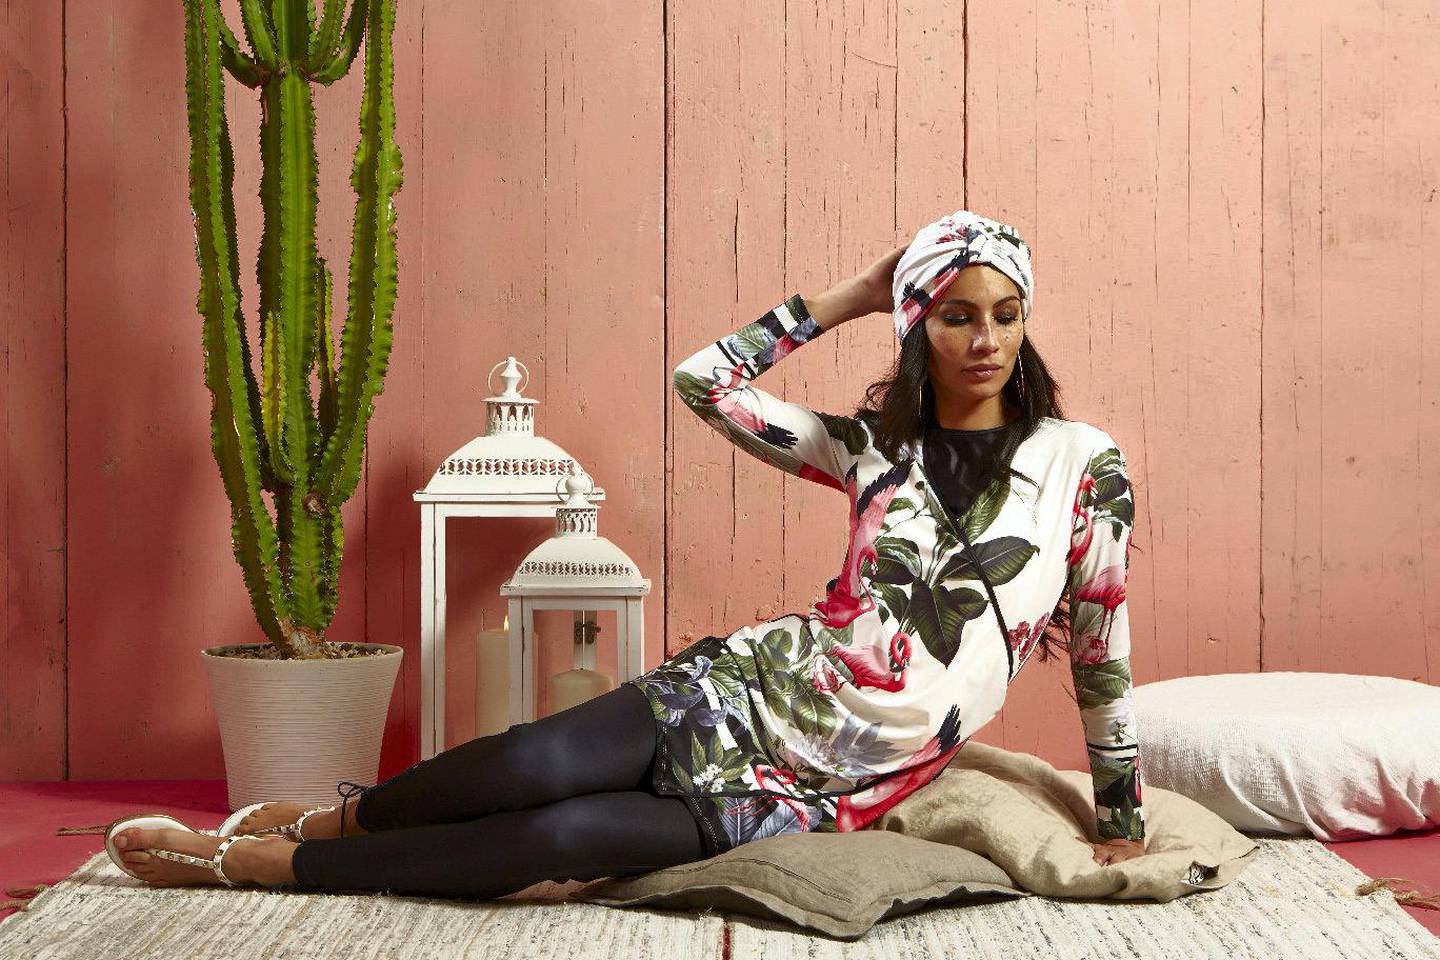 Munamer’s burkinis feature block and garden prints, and wrap silhouettes.